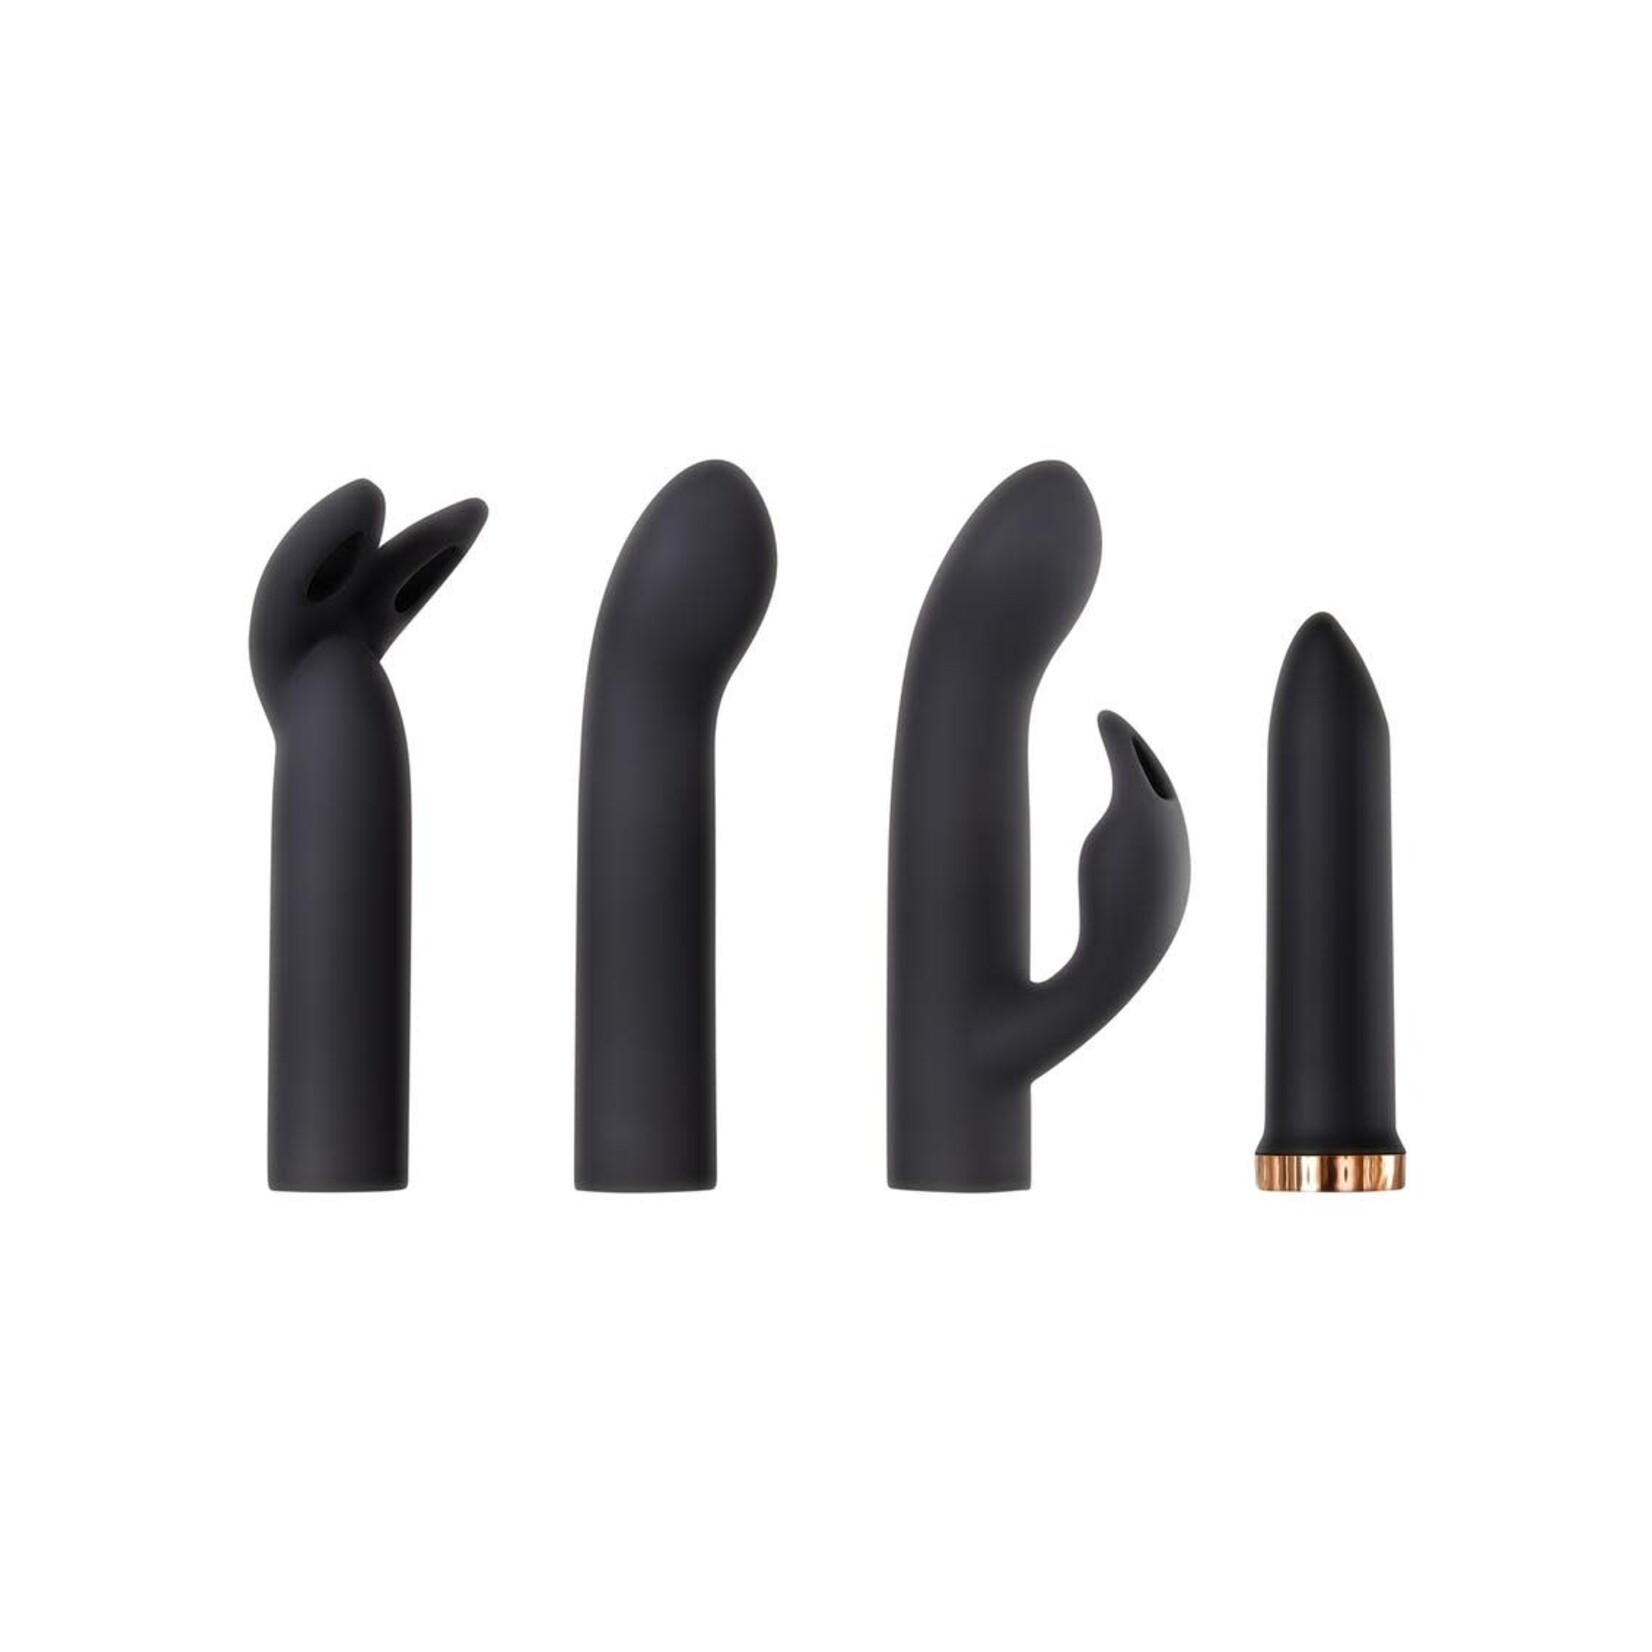 Four Play Rechargeable Bullet With 3 Silicone Sleeves Kit - Black